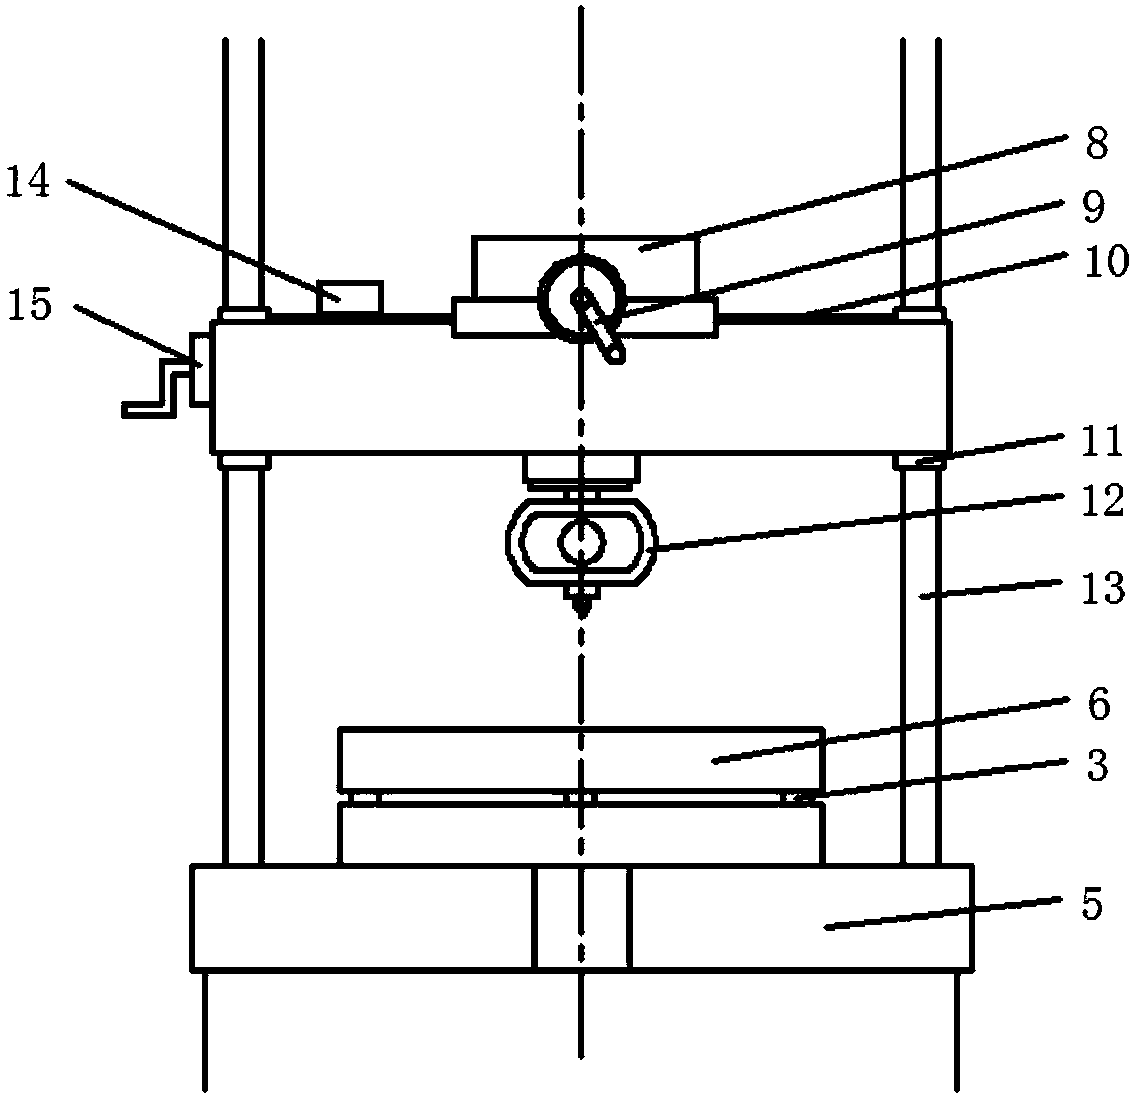 Multi-support piezoelectric dynamometer calibration method